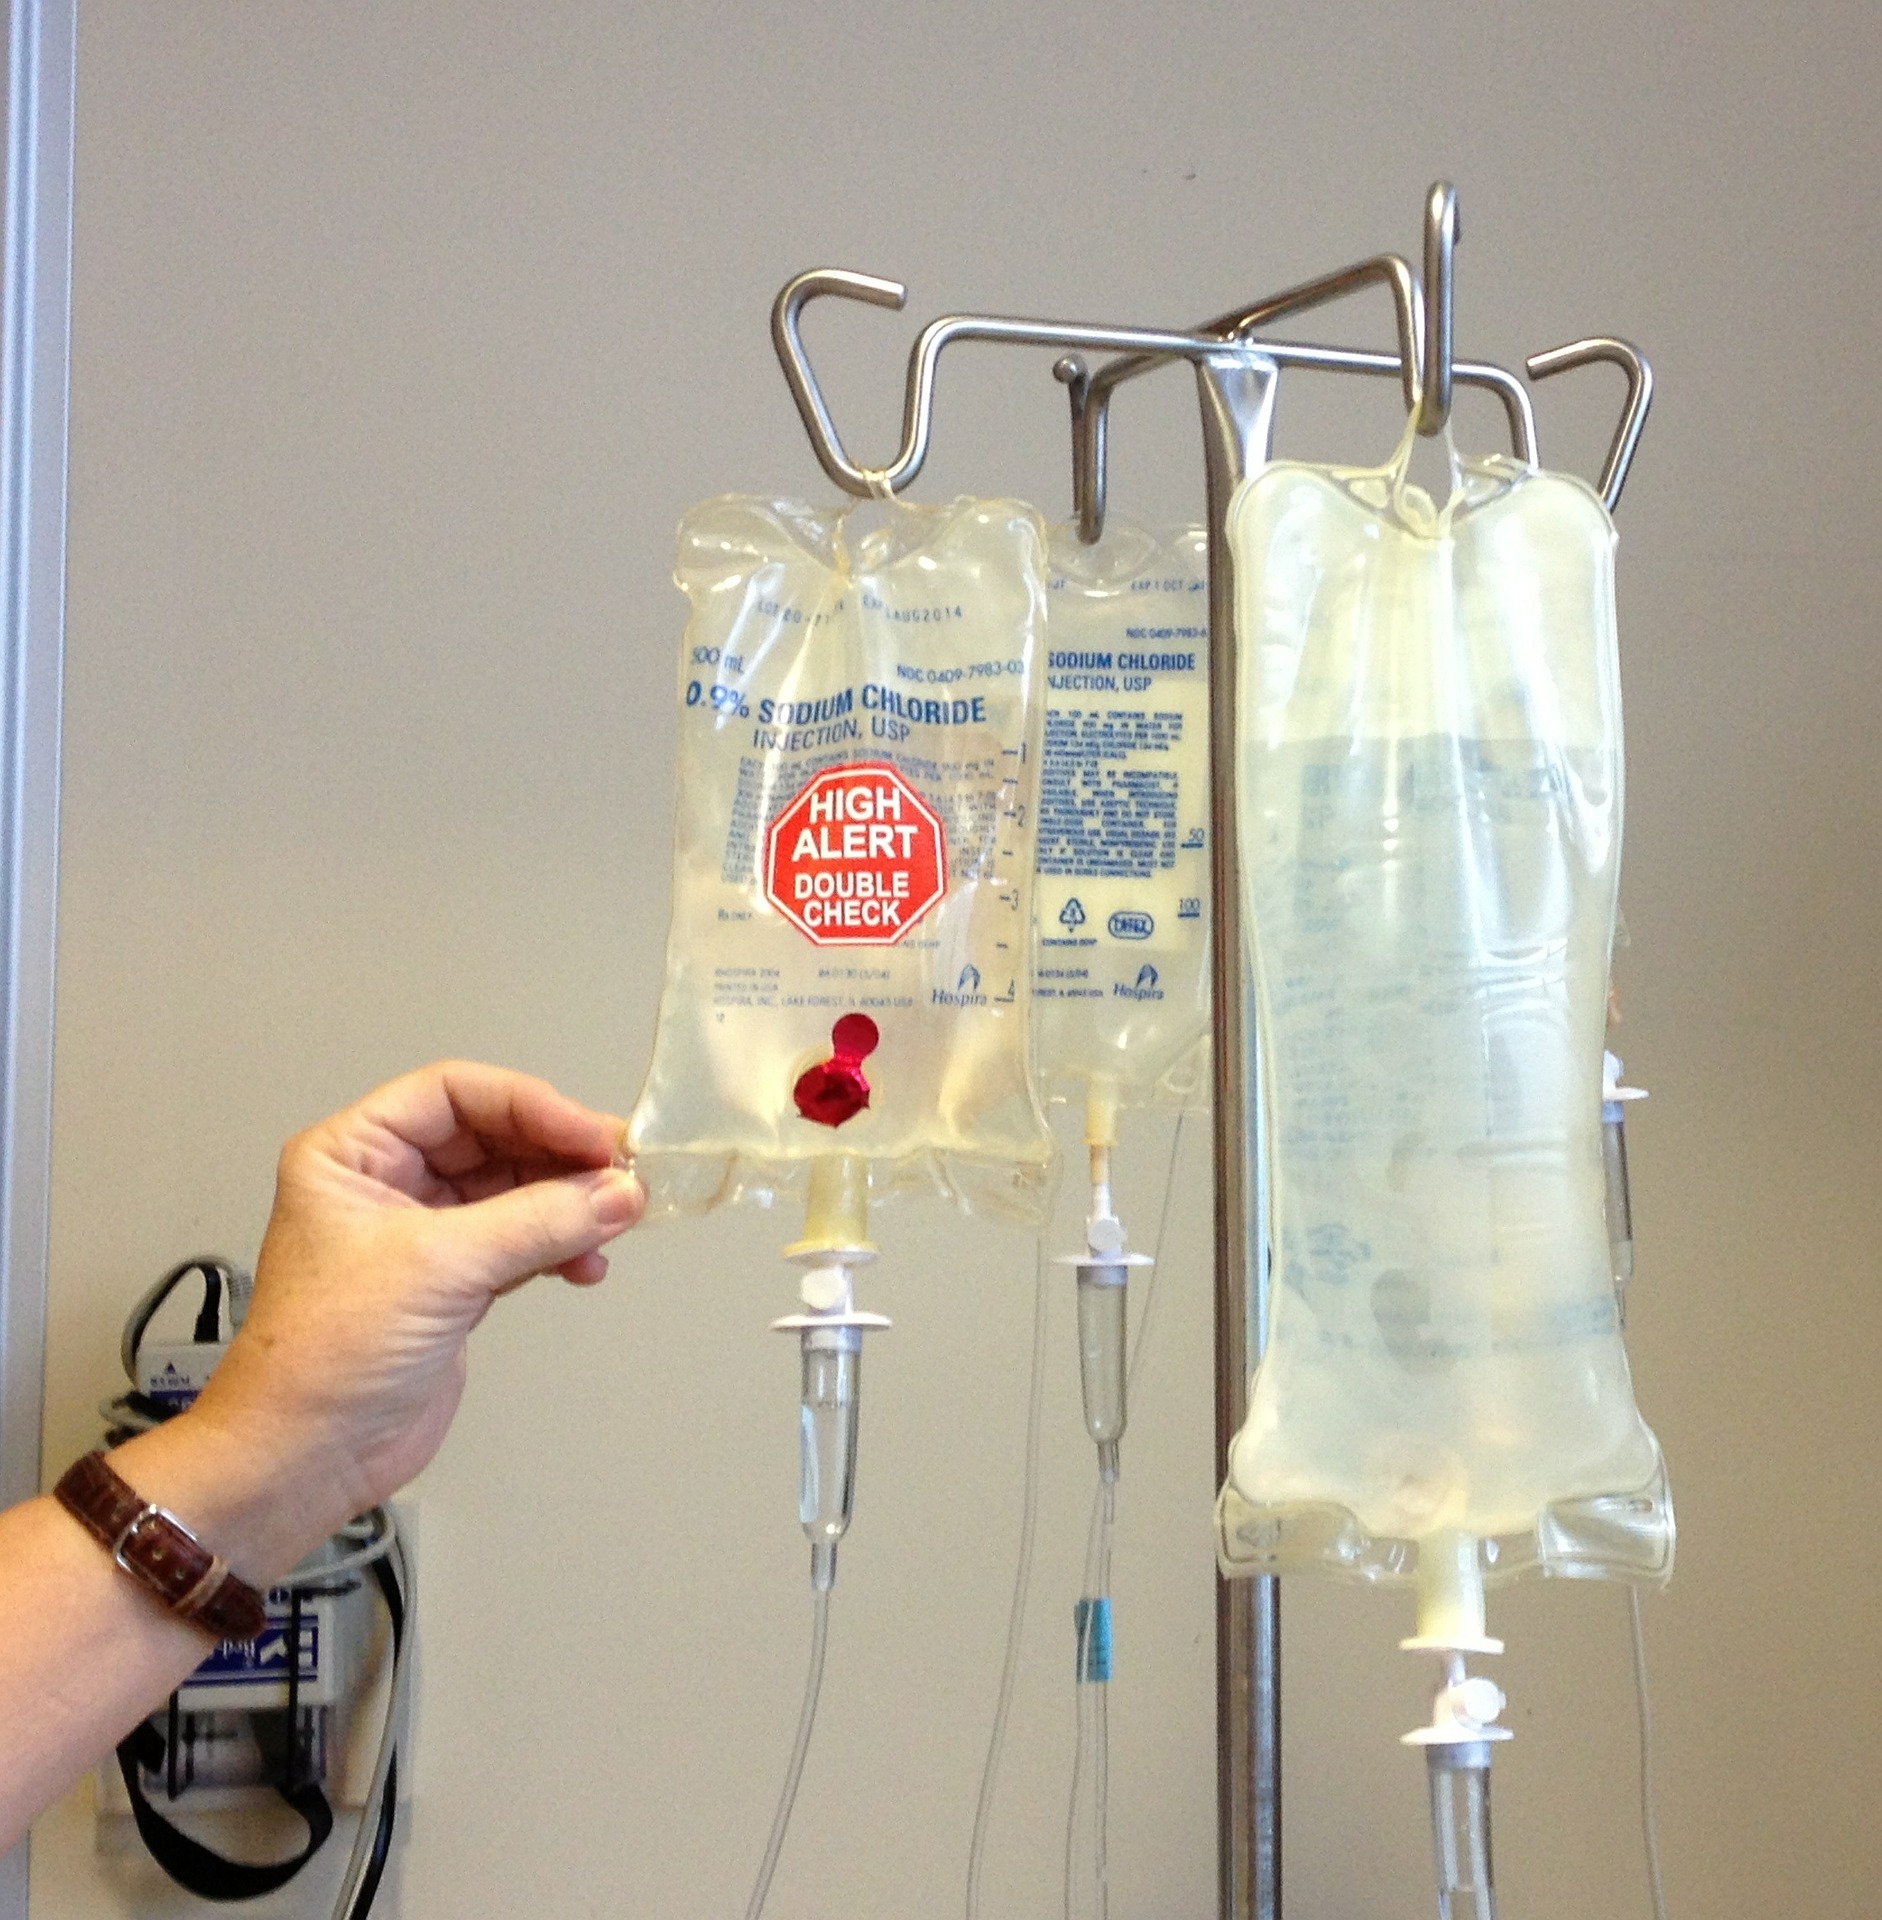 bags being prepared for chemotherapy infusion